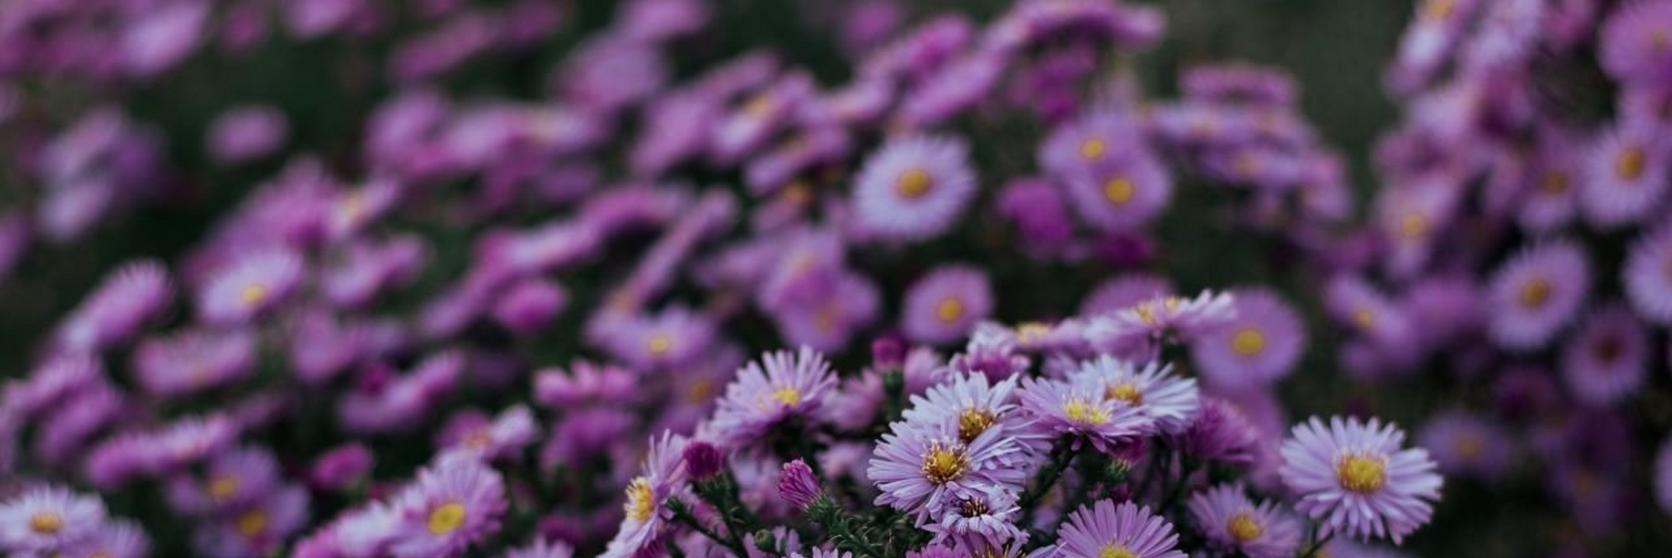 Aster-group